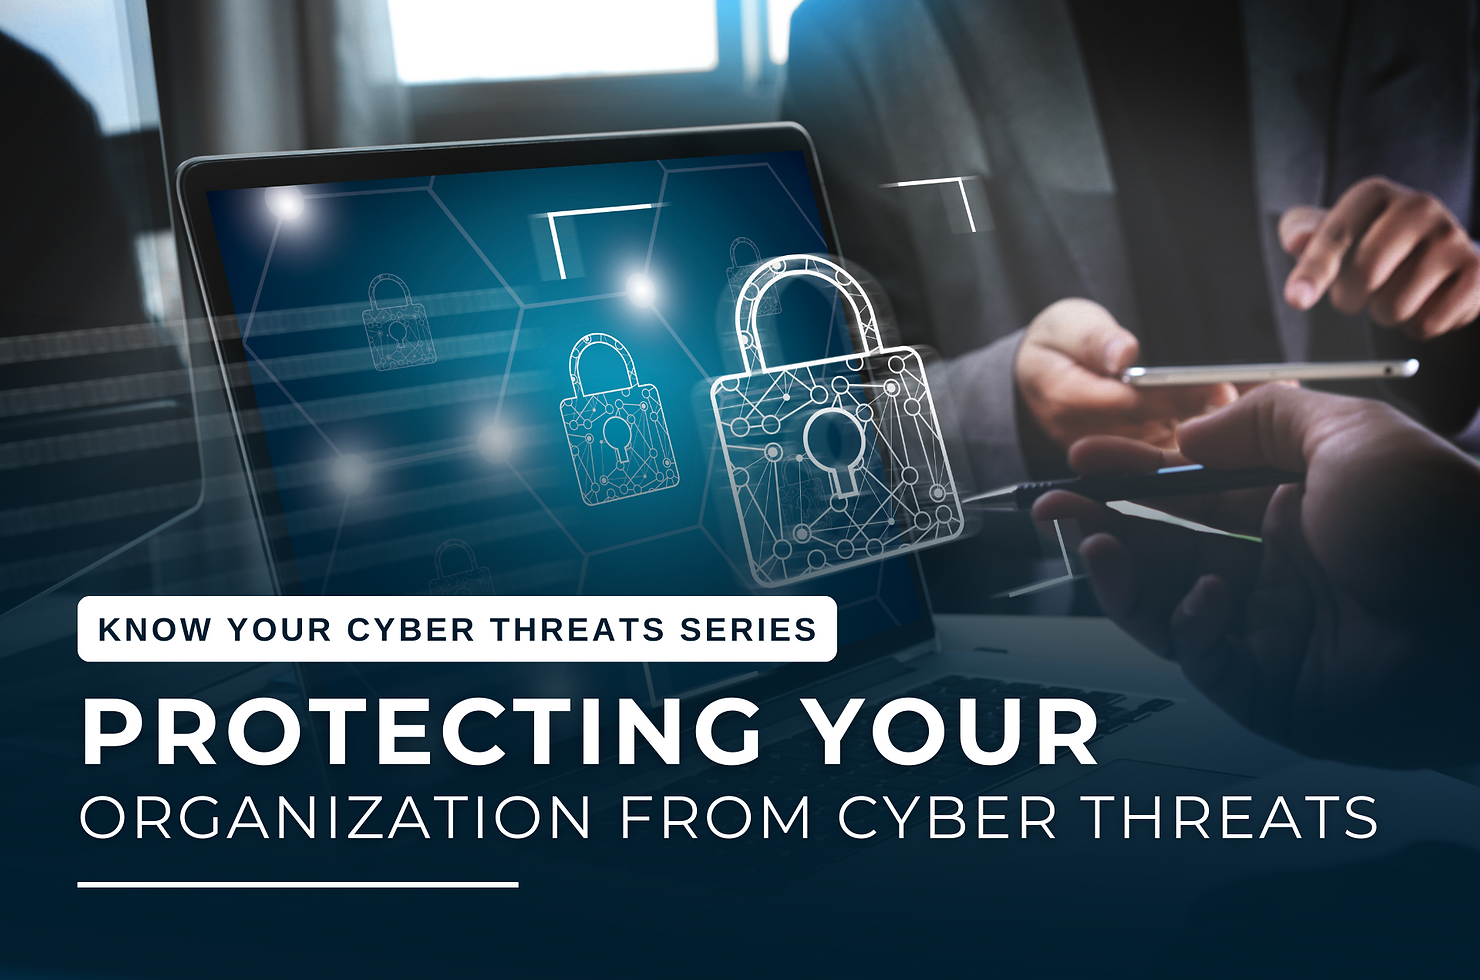 PROTECTING YOUR ORGANIZATION FROM CYBER THREATS